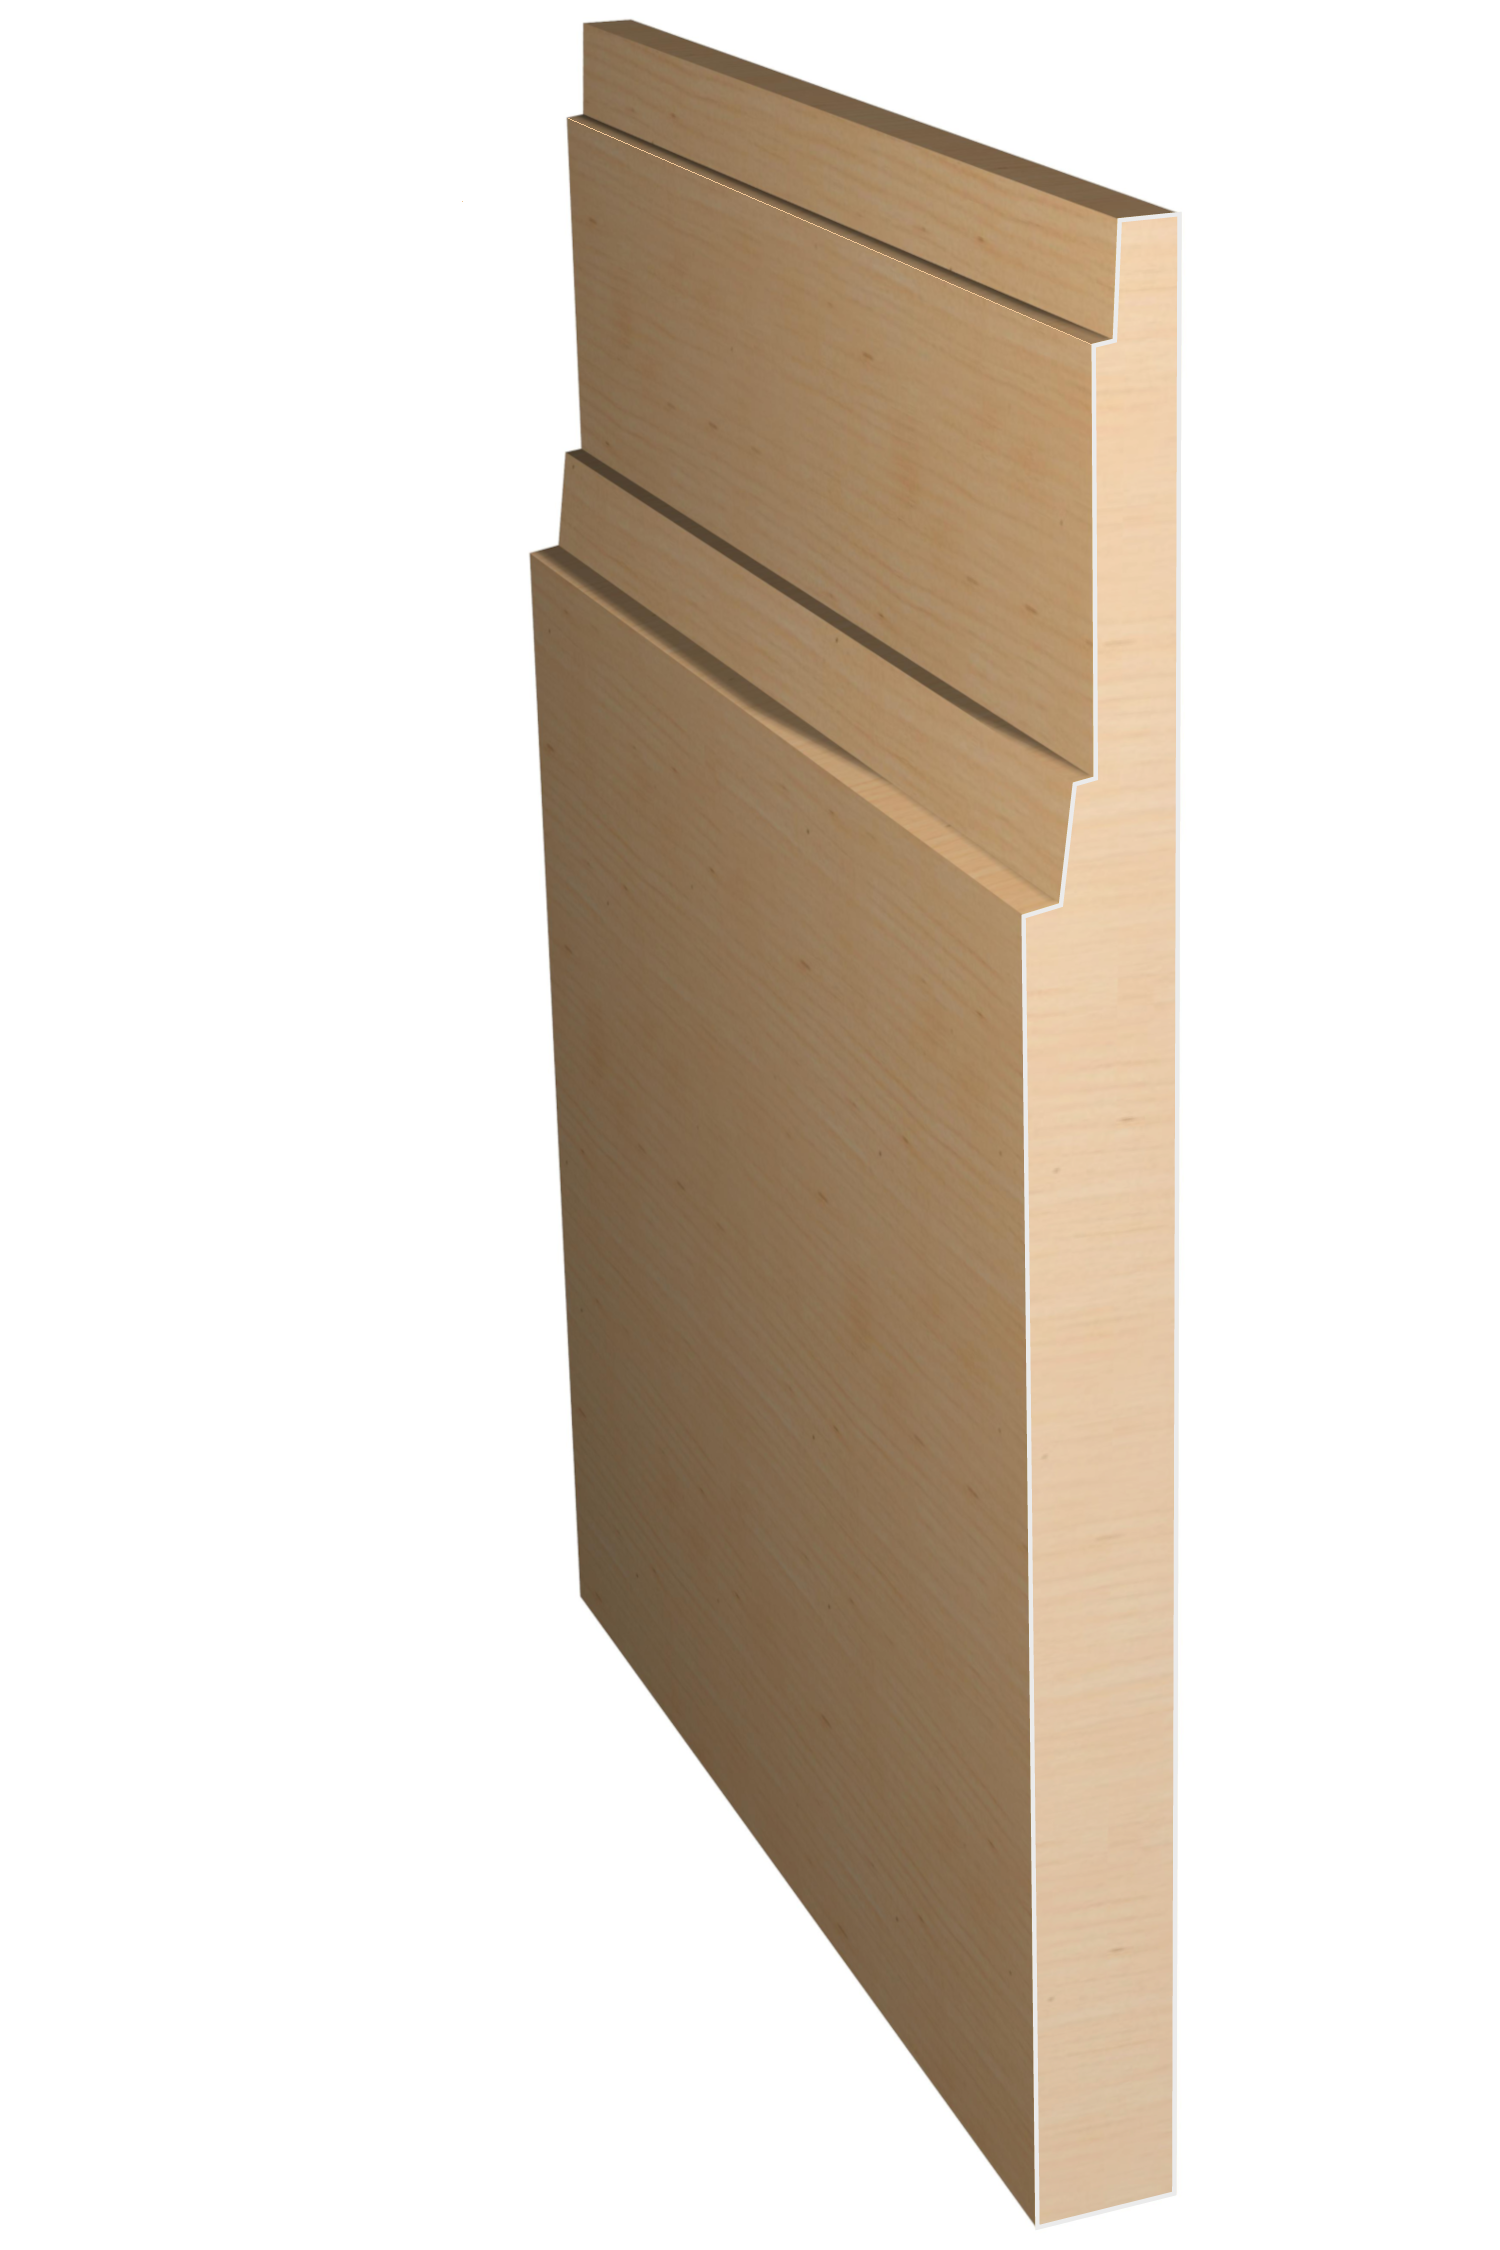 Three dimensional rendering of custom base wood molding BAPL96 made by Public Lumber Company in Detroit.